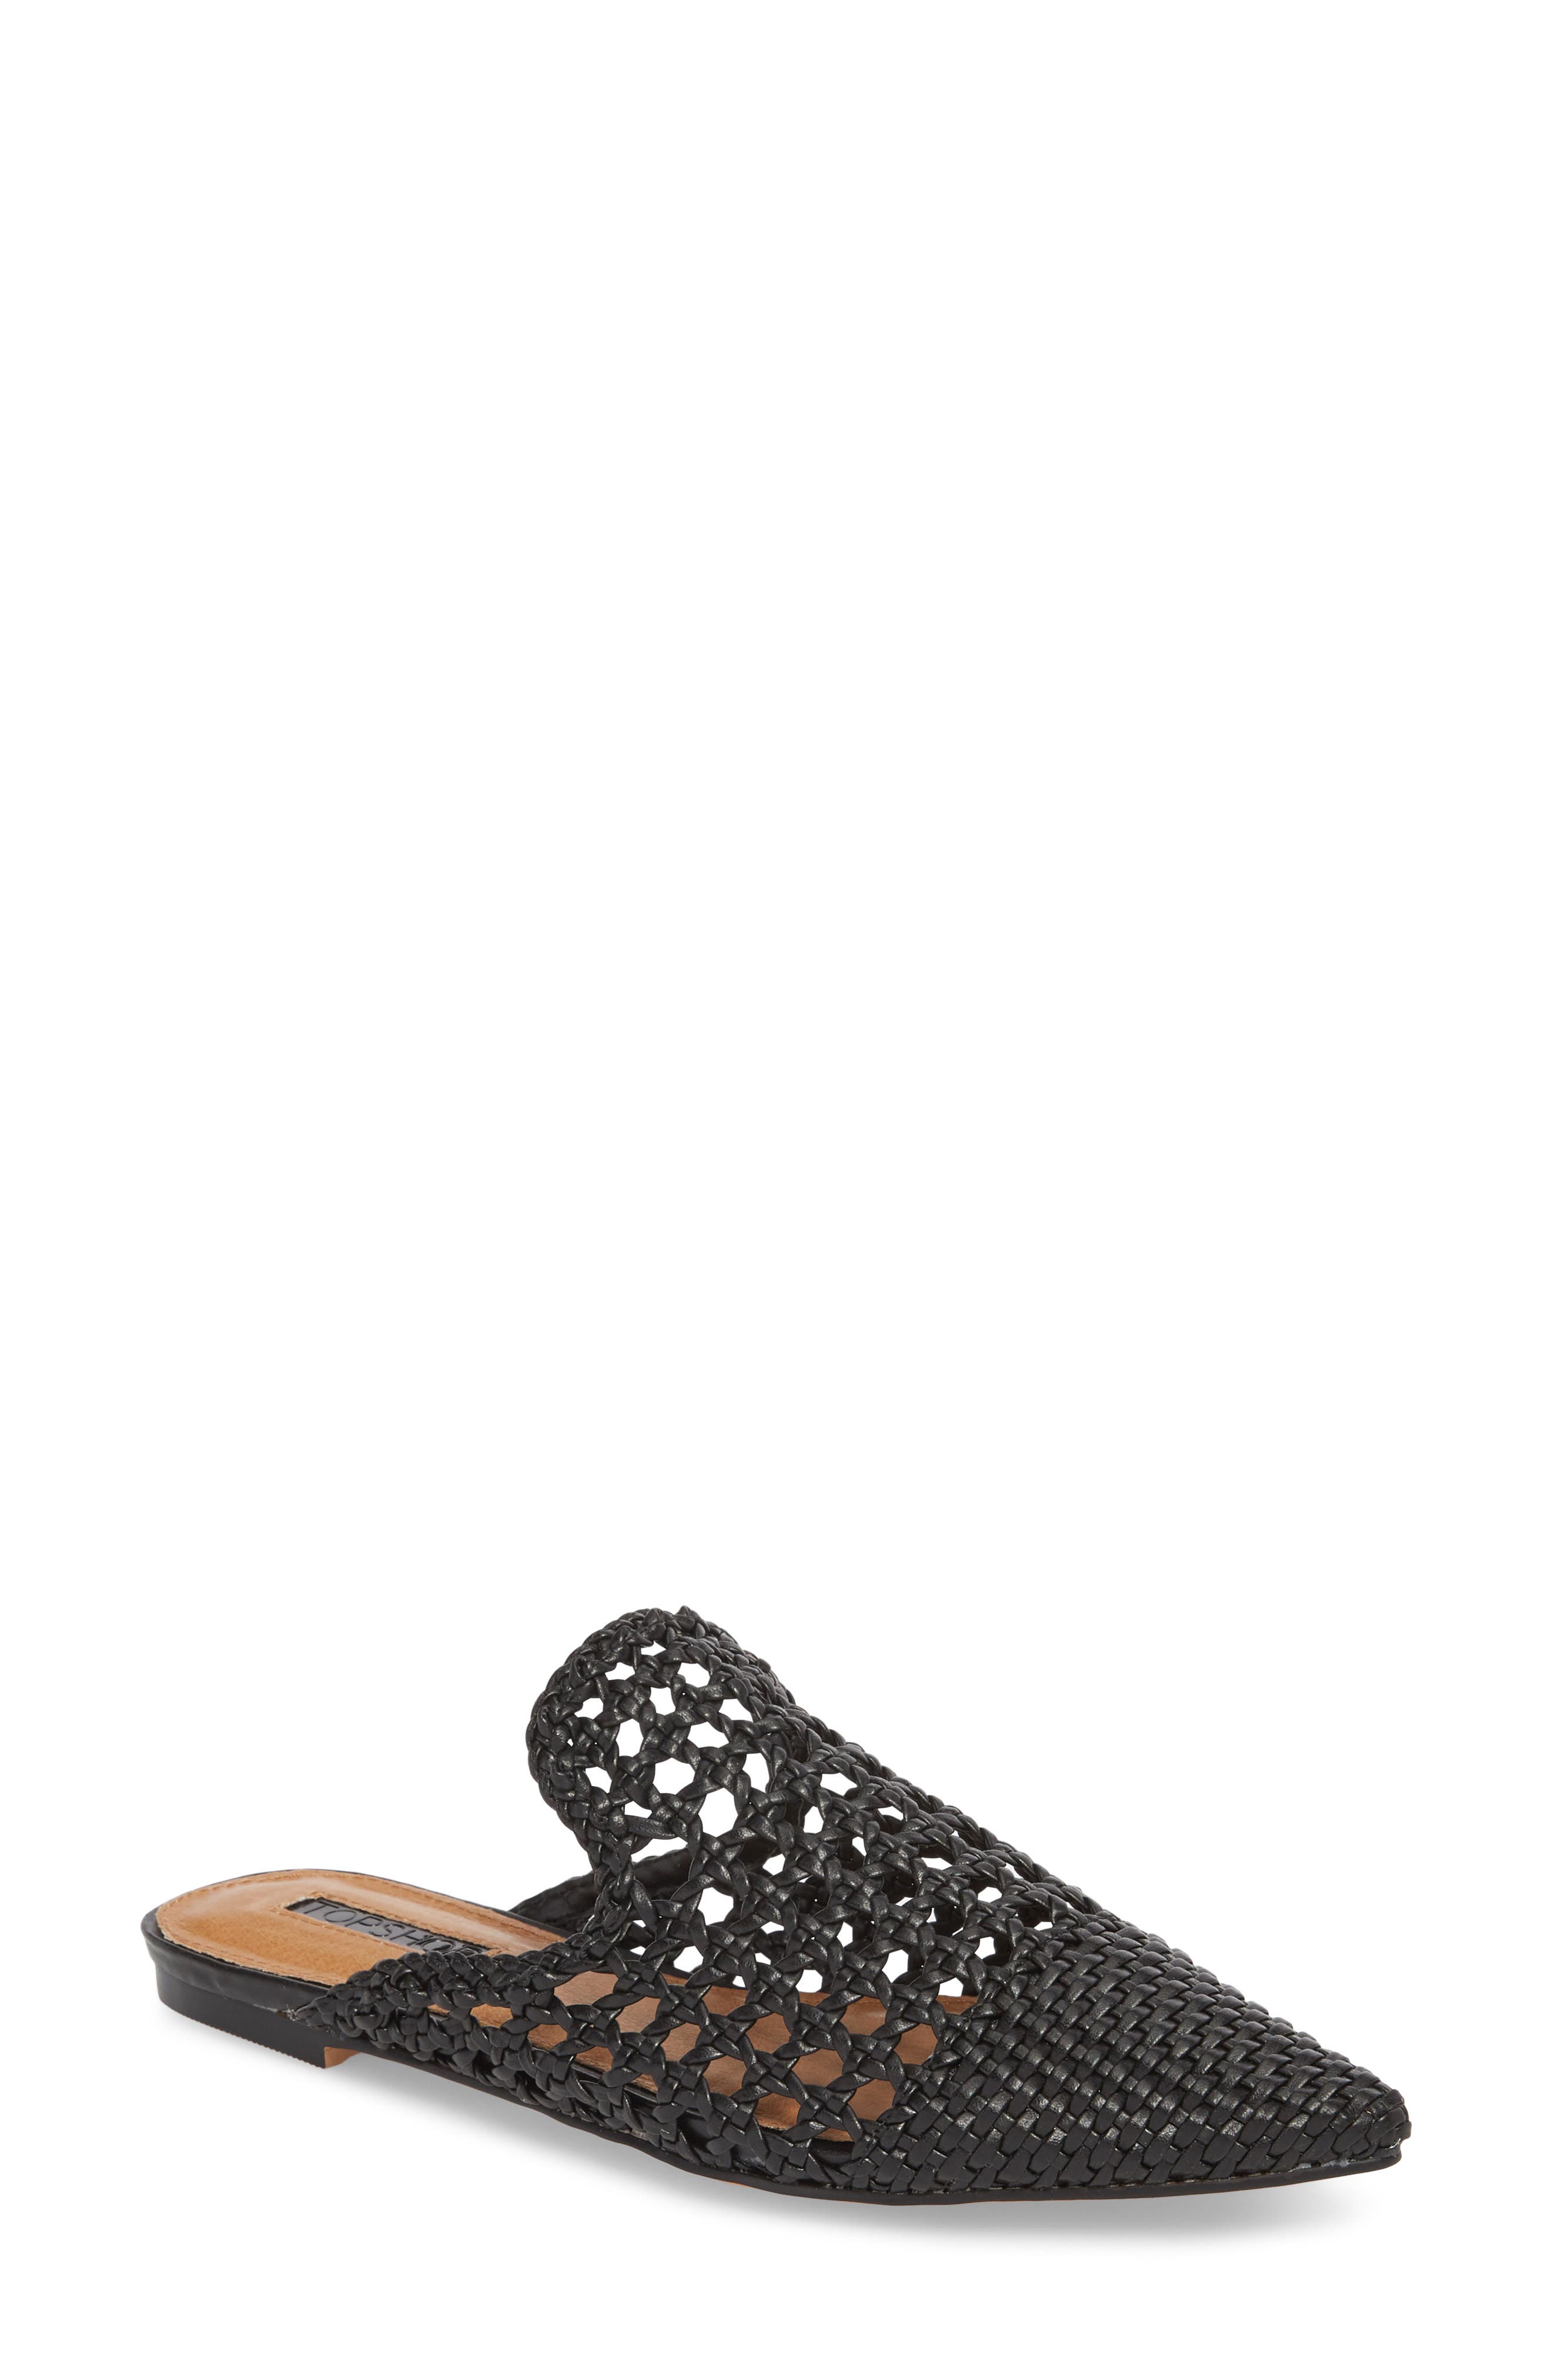 topshop woven mules